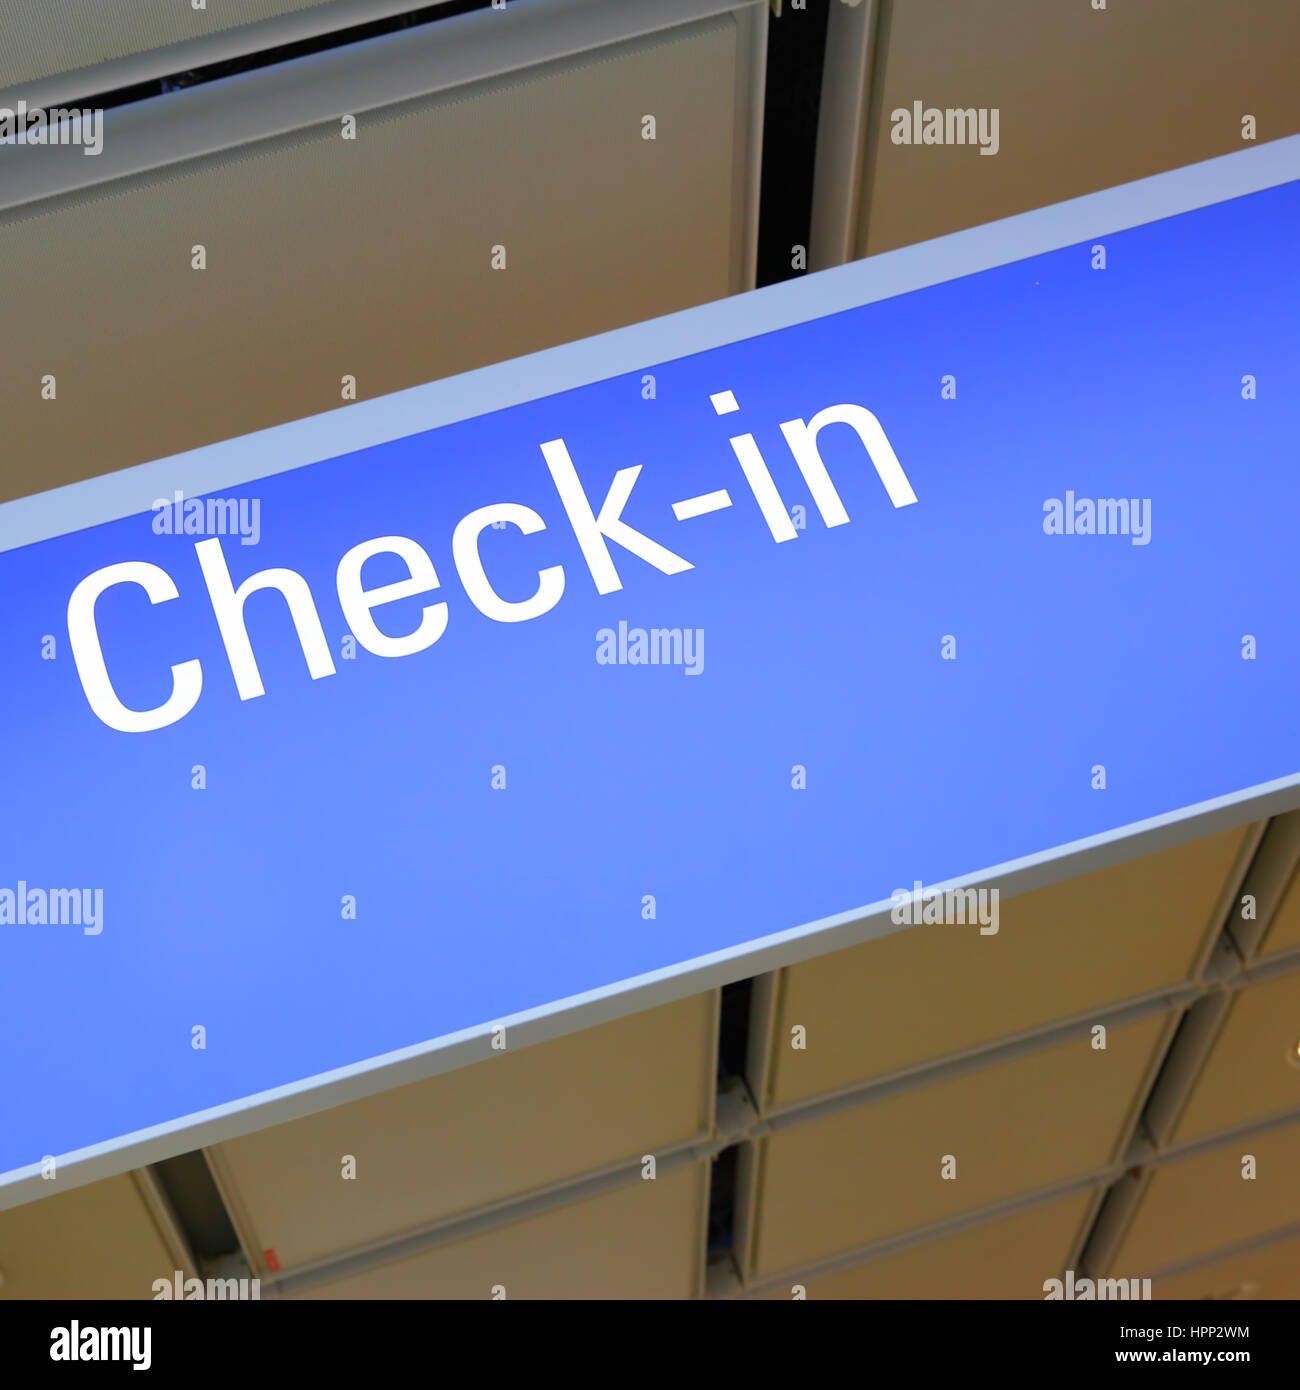 Check-in sign in an airport Stock Photo